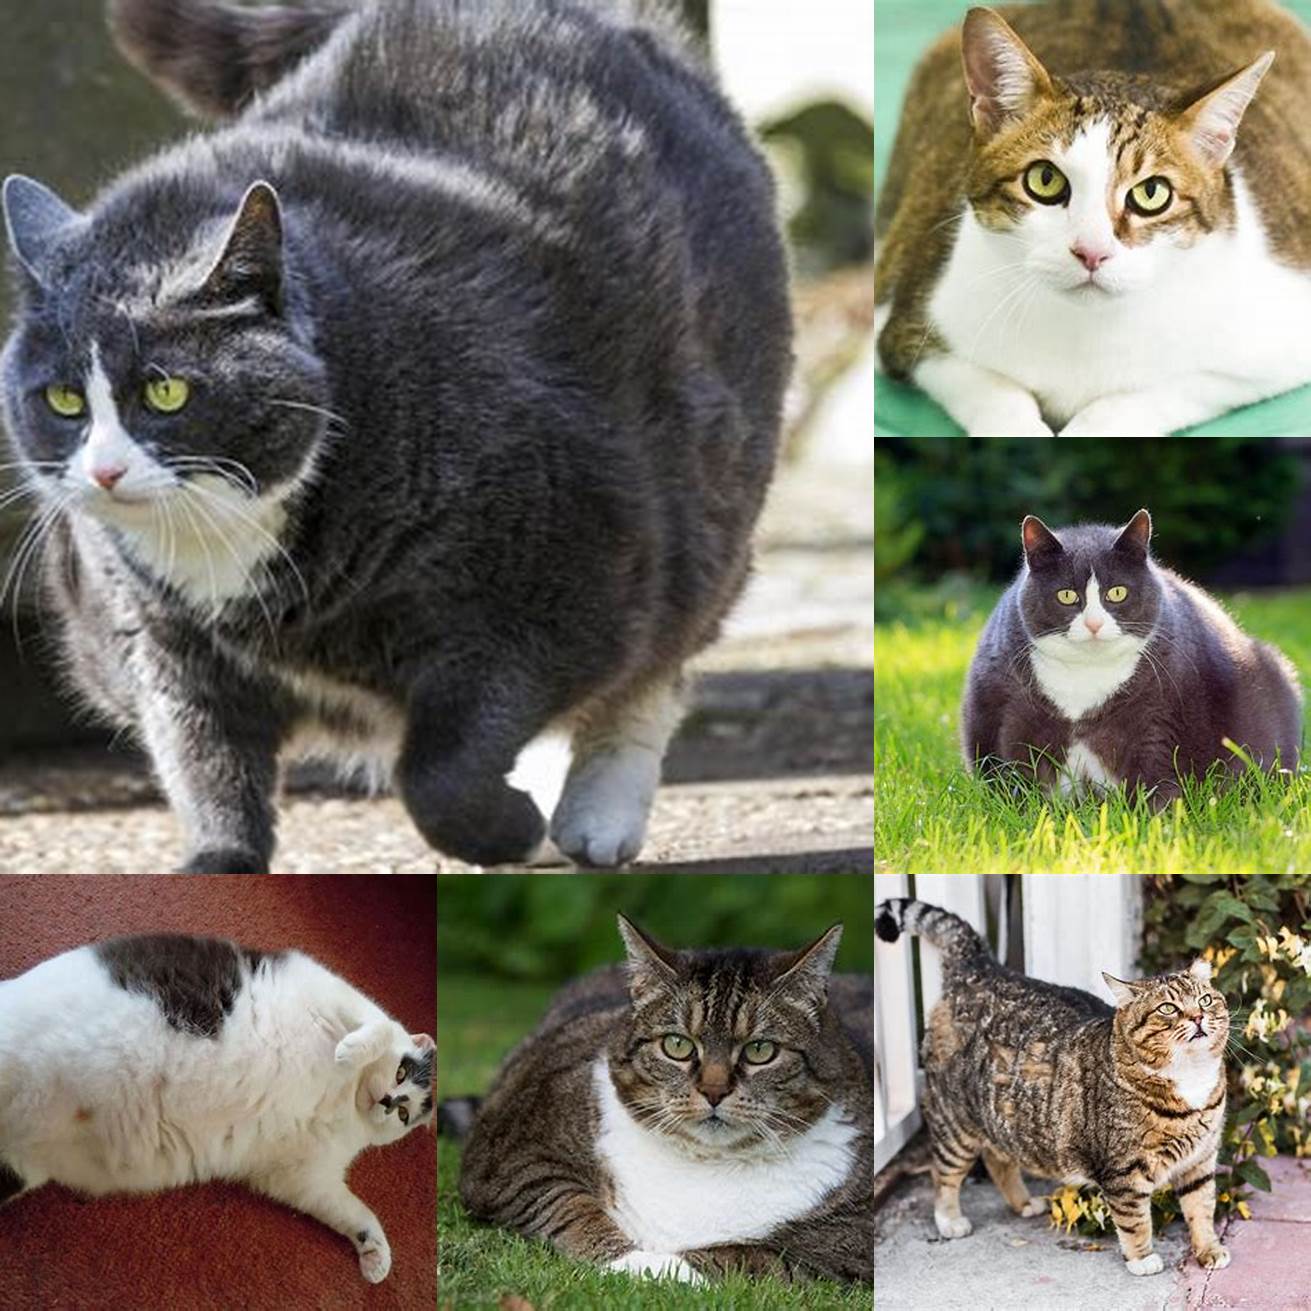 Obesity Overweight cats are more likely to develop diabetes